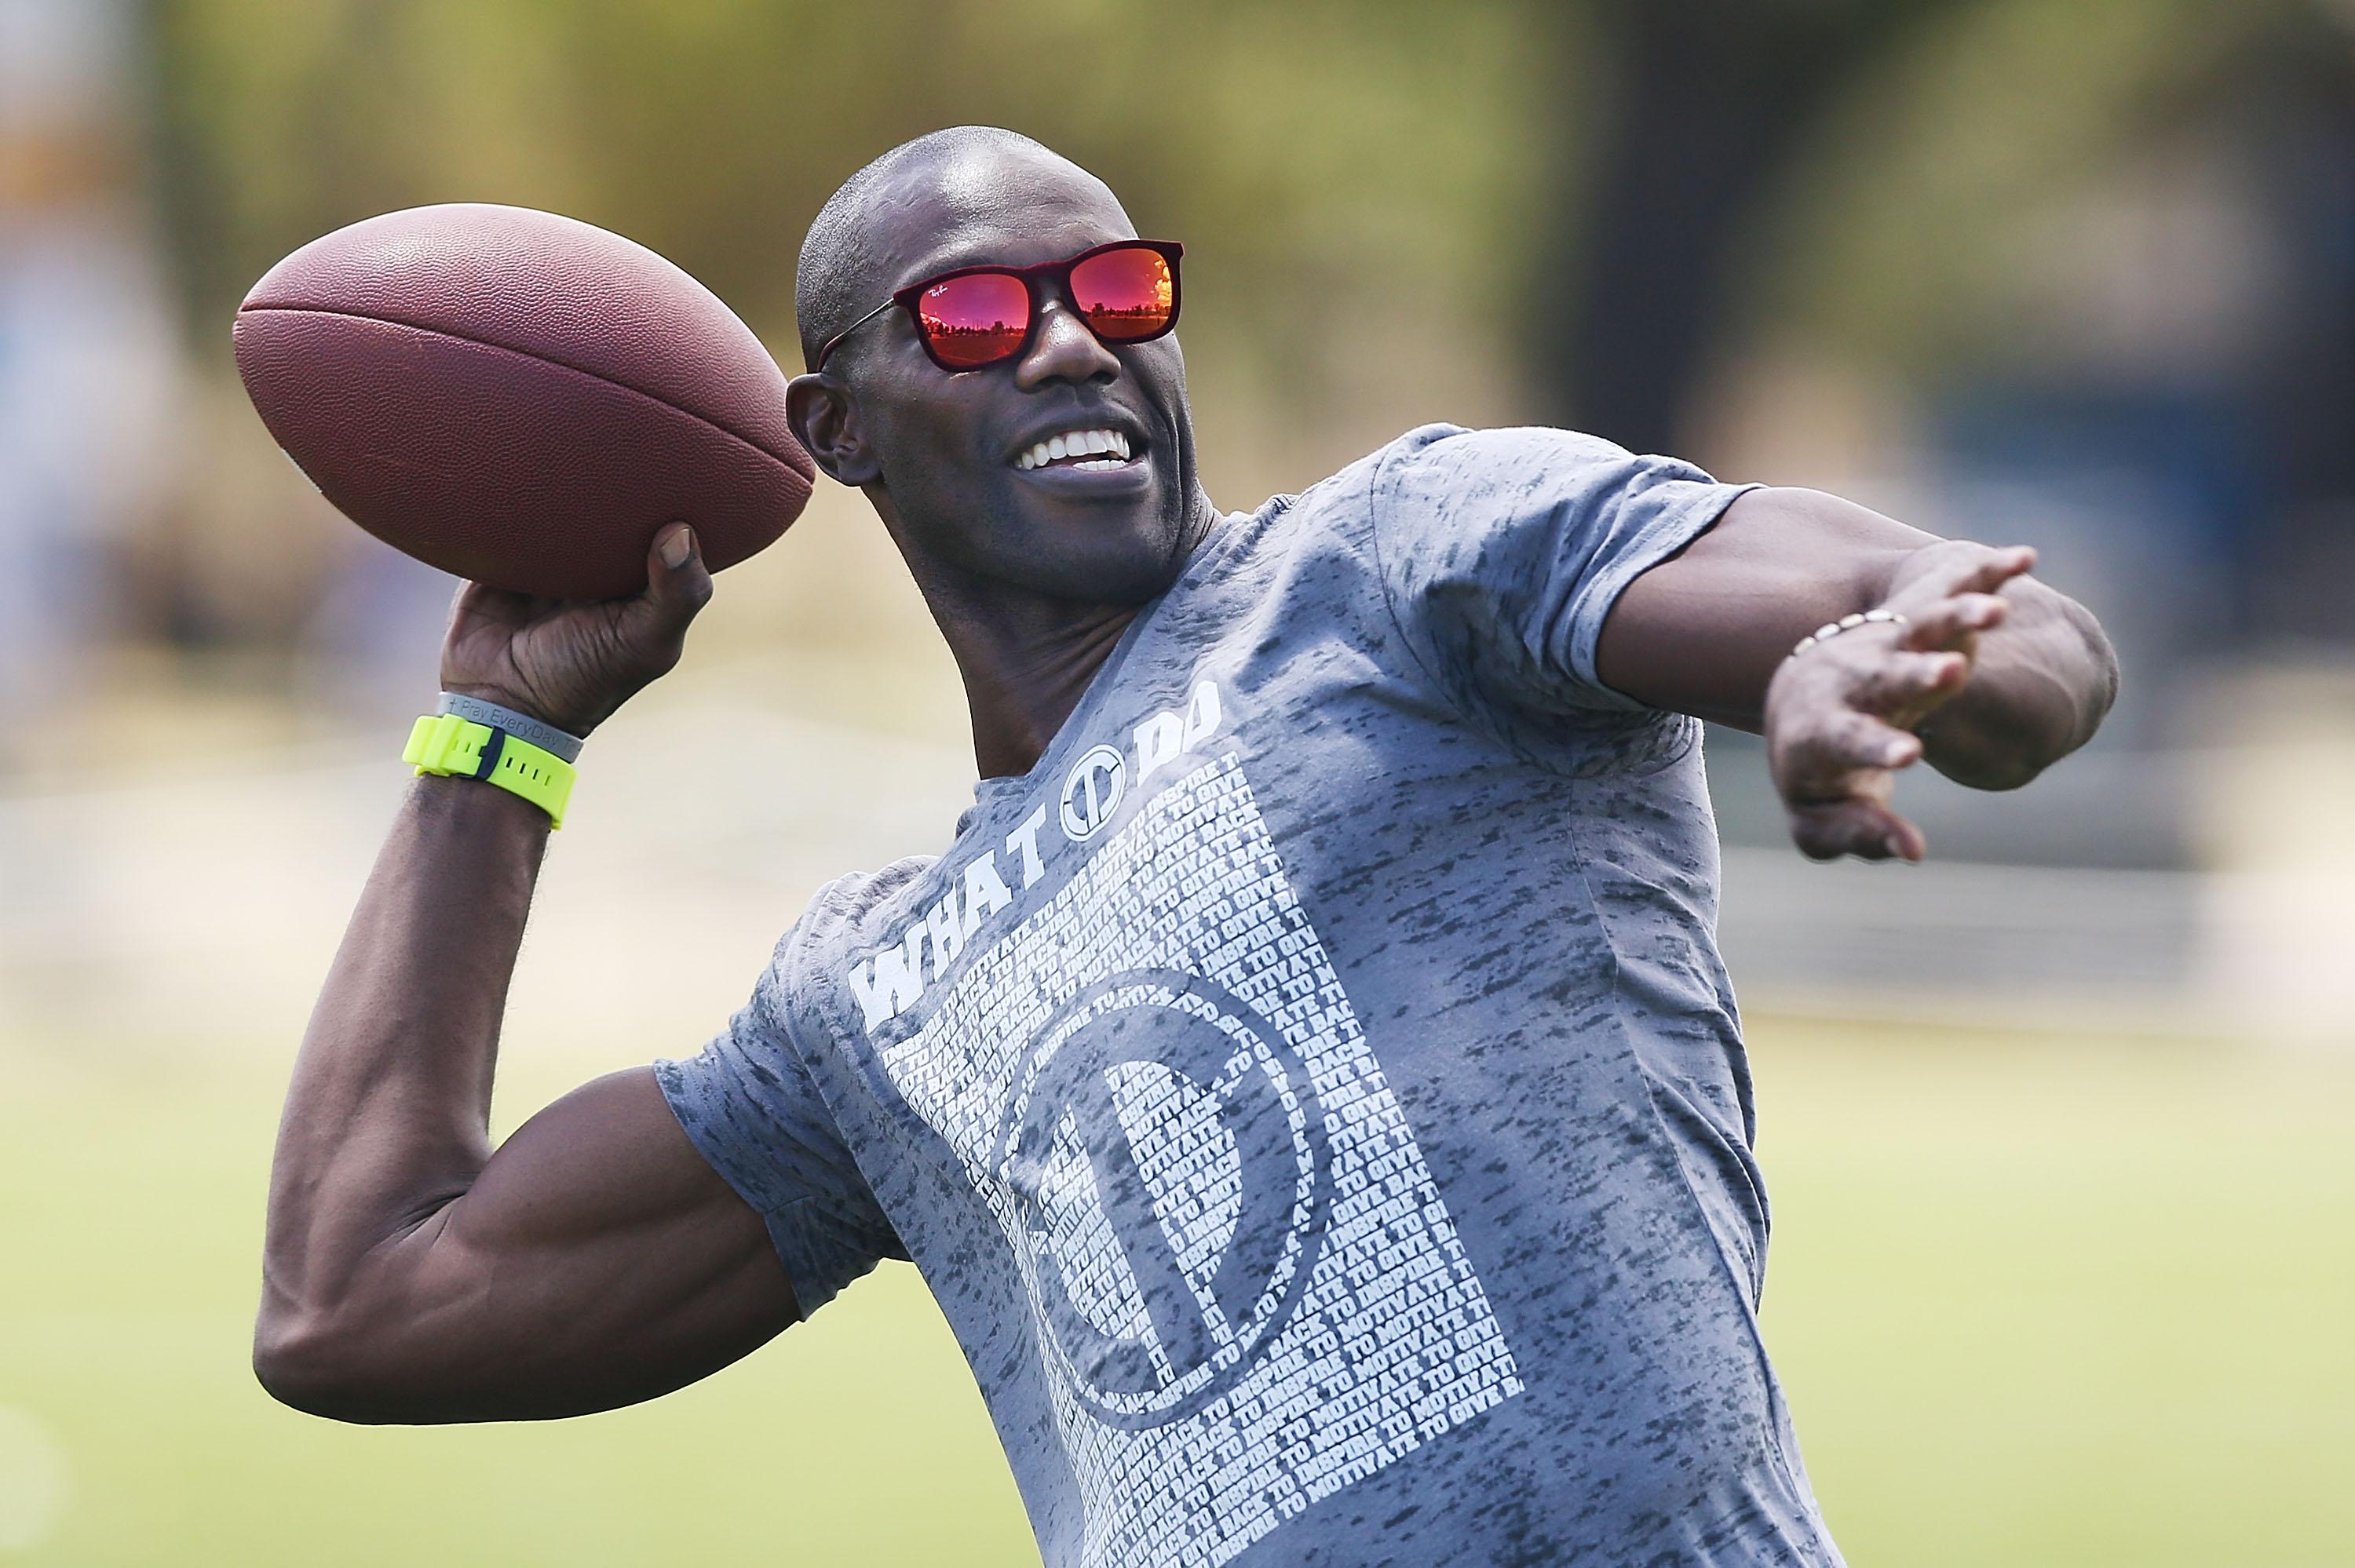 Terrell Owens Contacts Cowboys & More Teams For NFL Comback